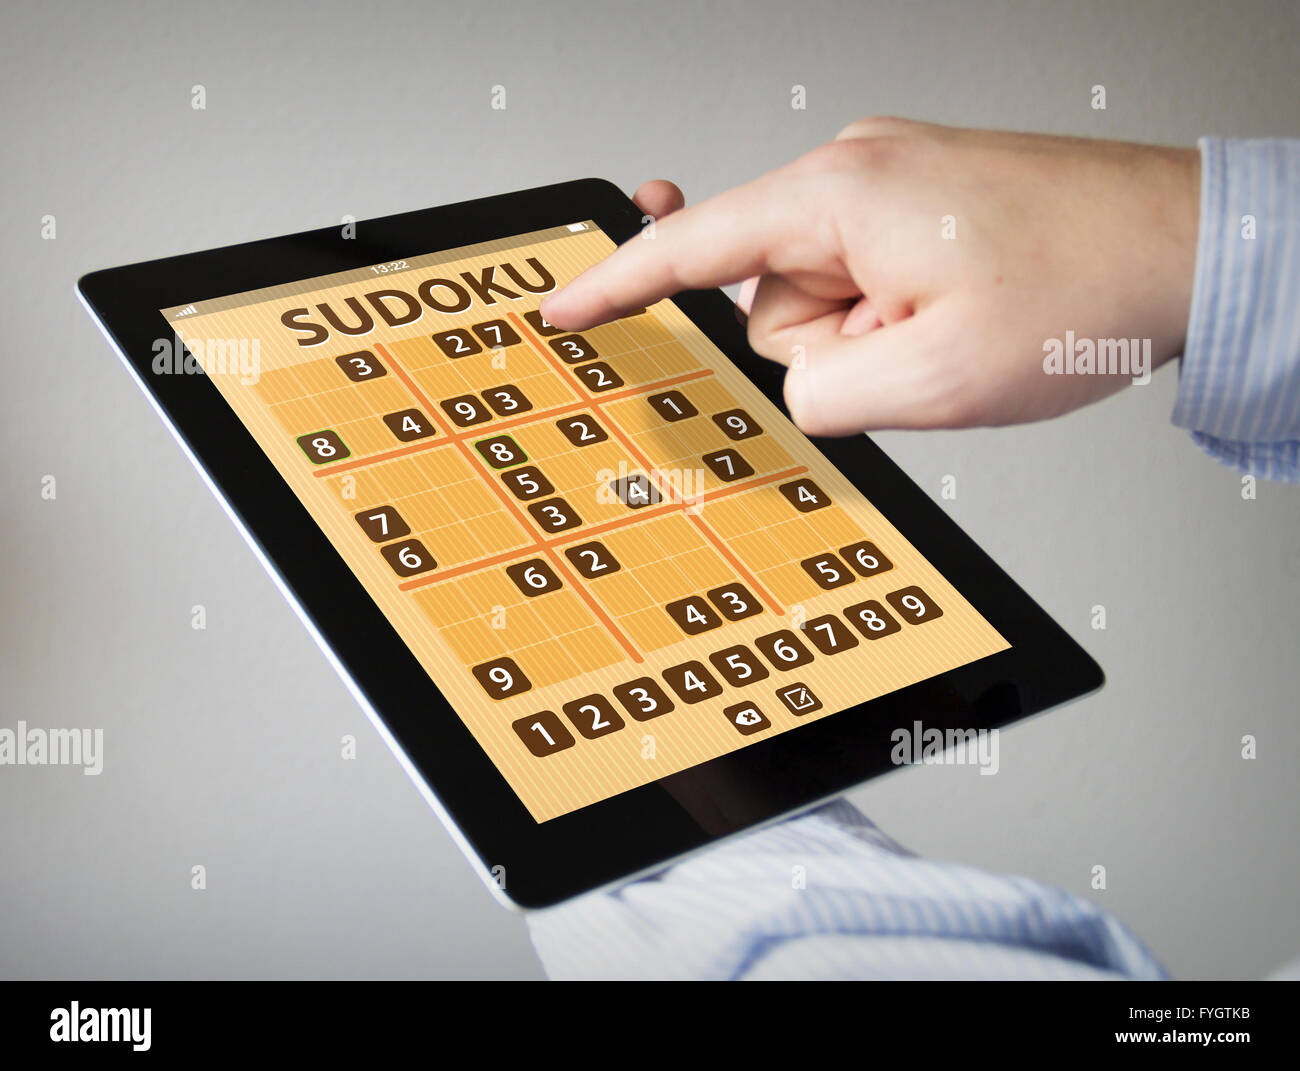 hands with touchscreen tablet with sudoku game aplication Stock Photo